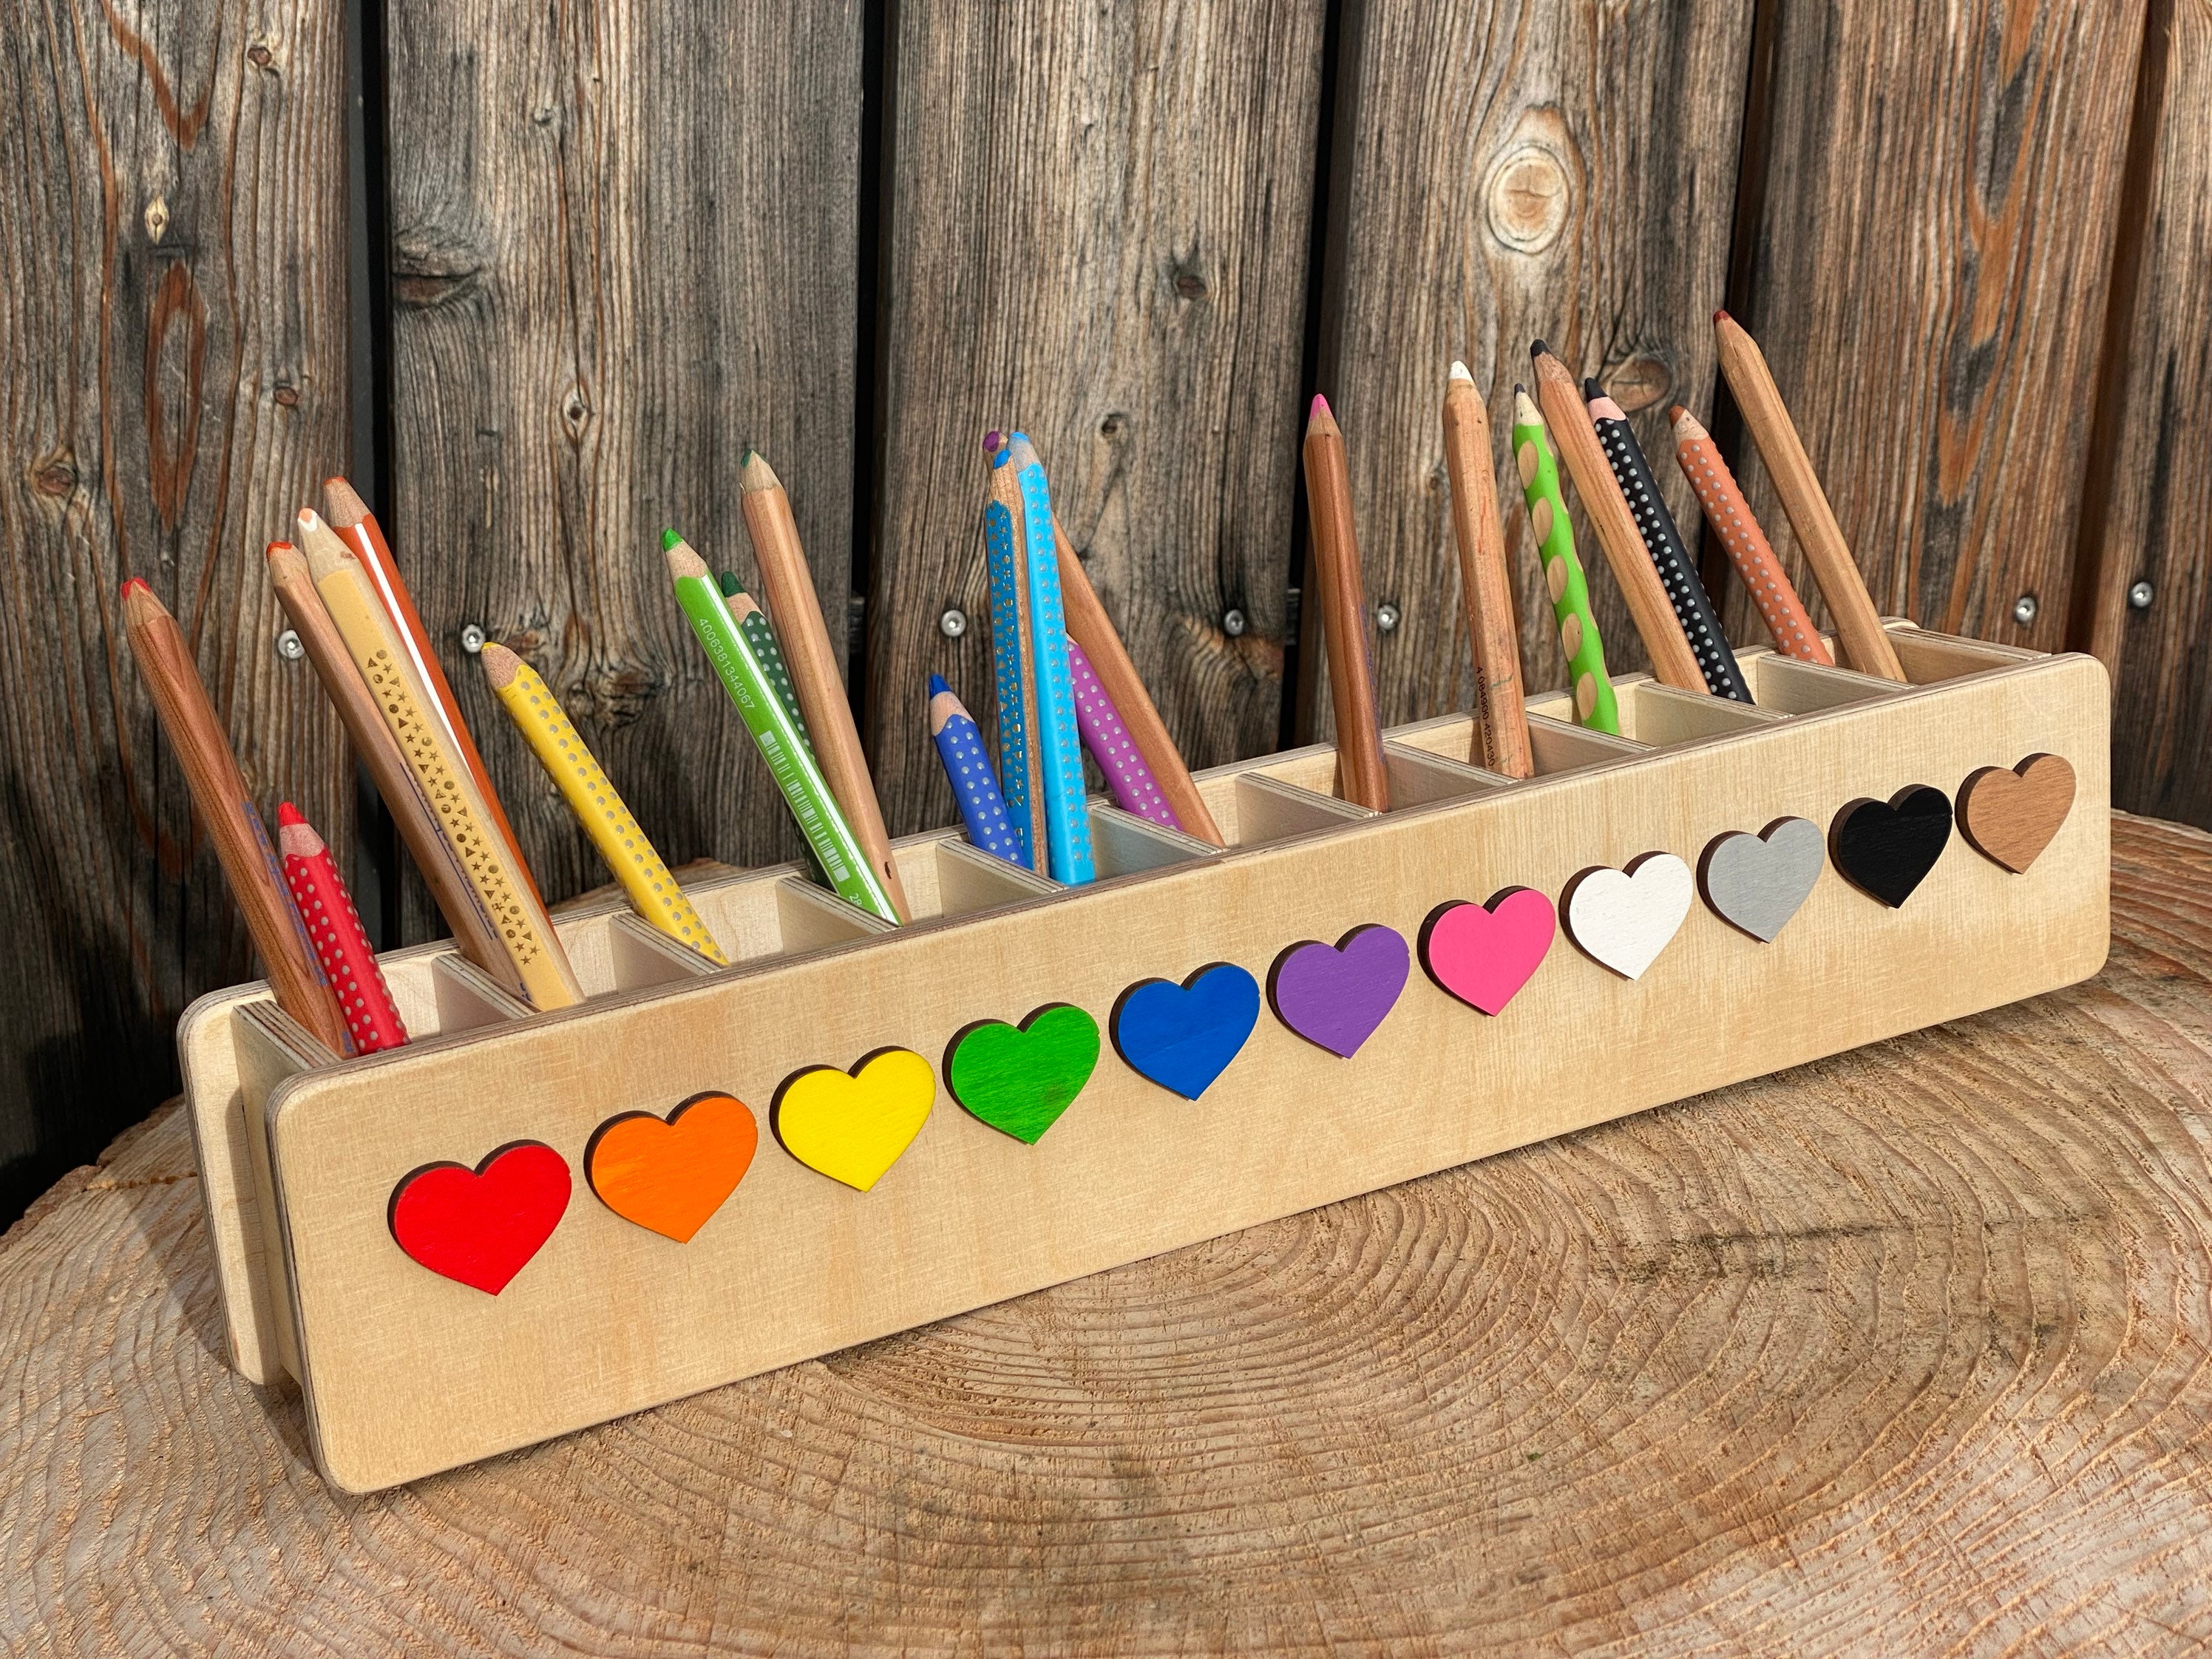 Montessori Pen & Pencil Holder for Kids, Long Wooden Desk Organizer with 11 Colors Compartments for Brushes, Crayons, Markers, Stationery and Art